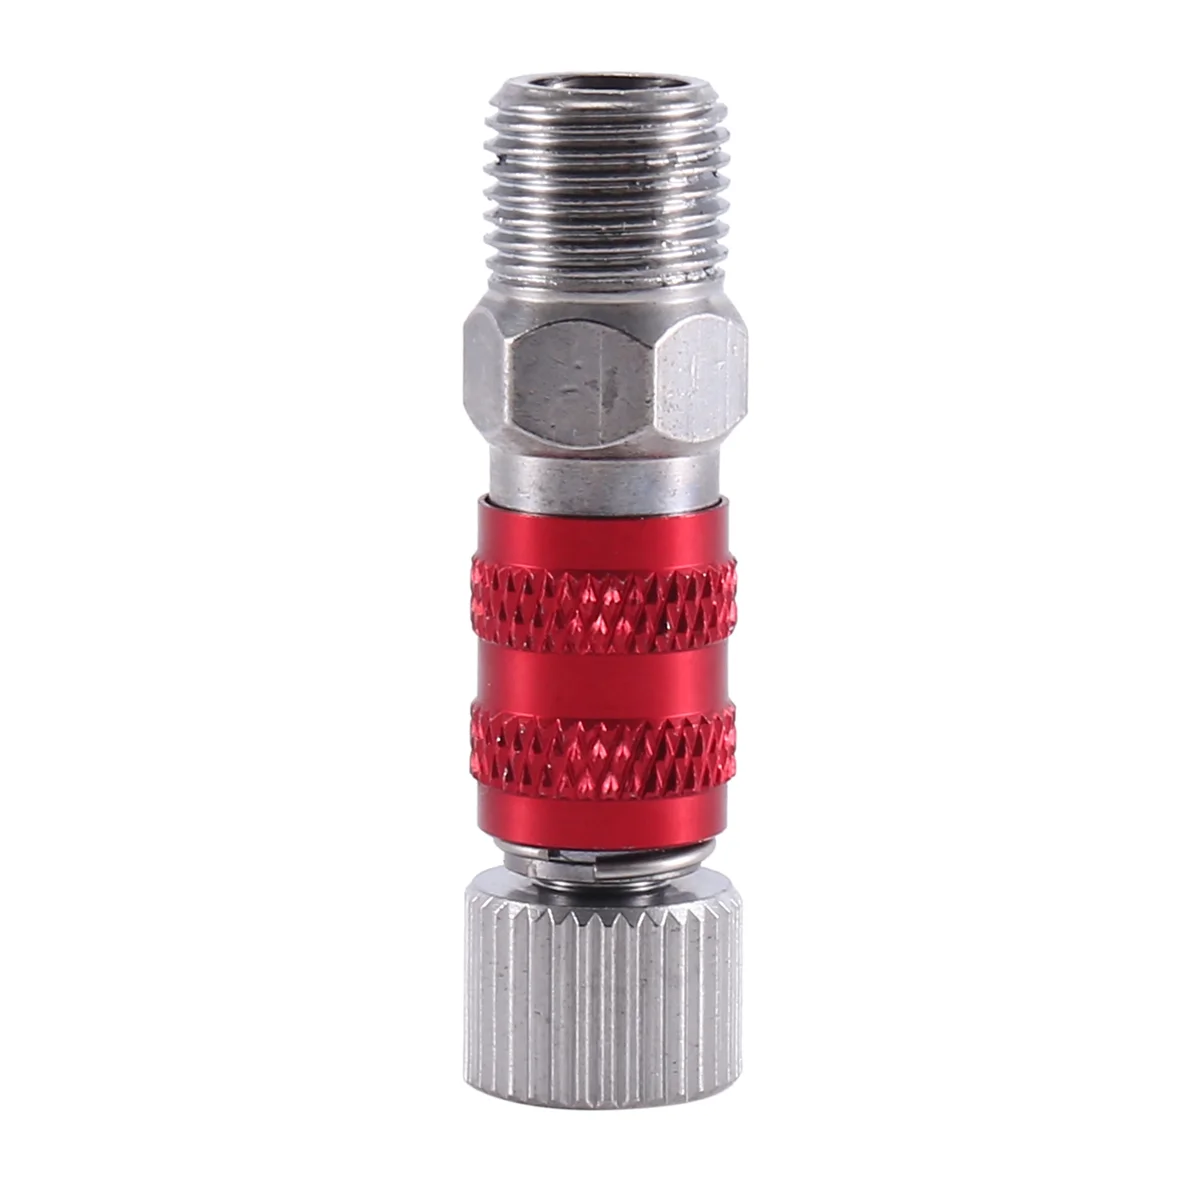 

Airbrush Quick Release Air Control Fitting Adapter 1/8 Inch Threaded Hose Connection Adjustment Valve Tool SD-401R